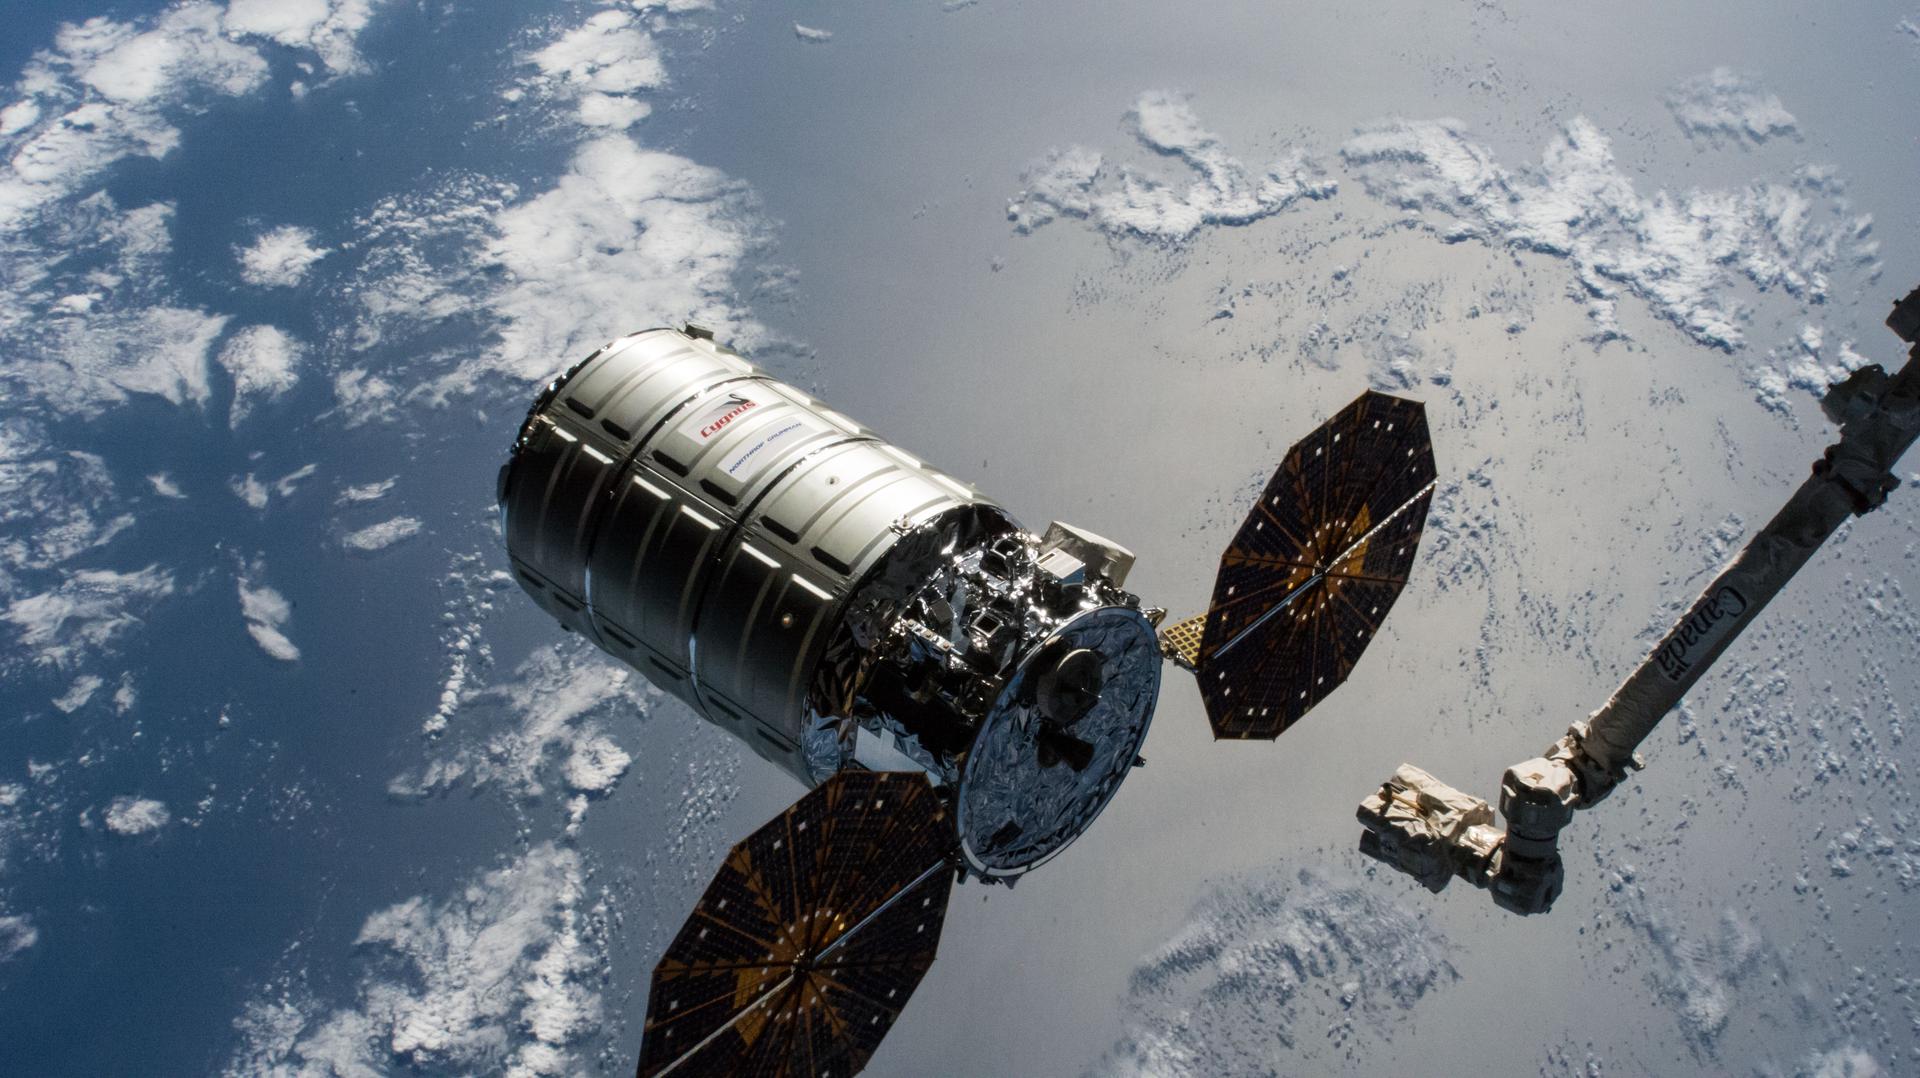 NG-17 Cygnus Release & Reentry Event image